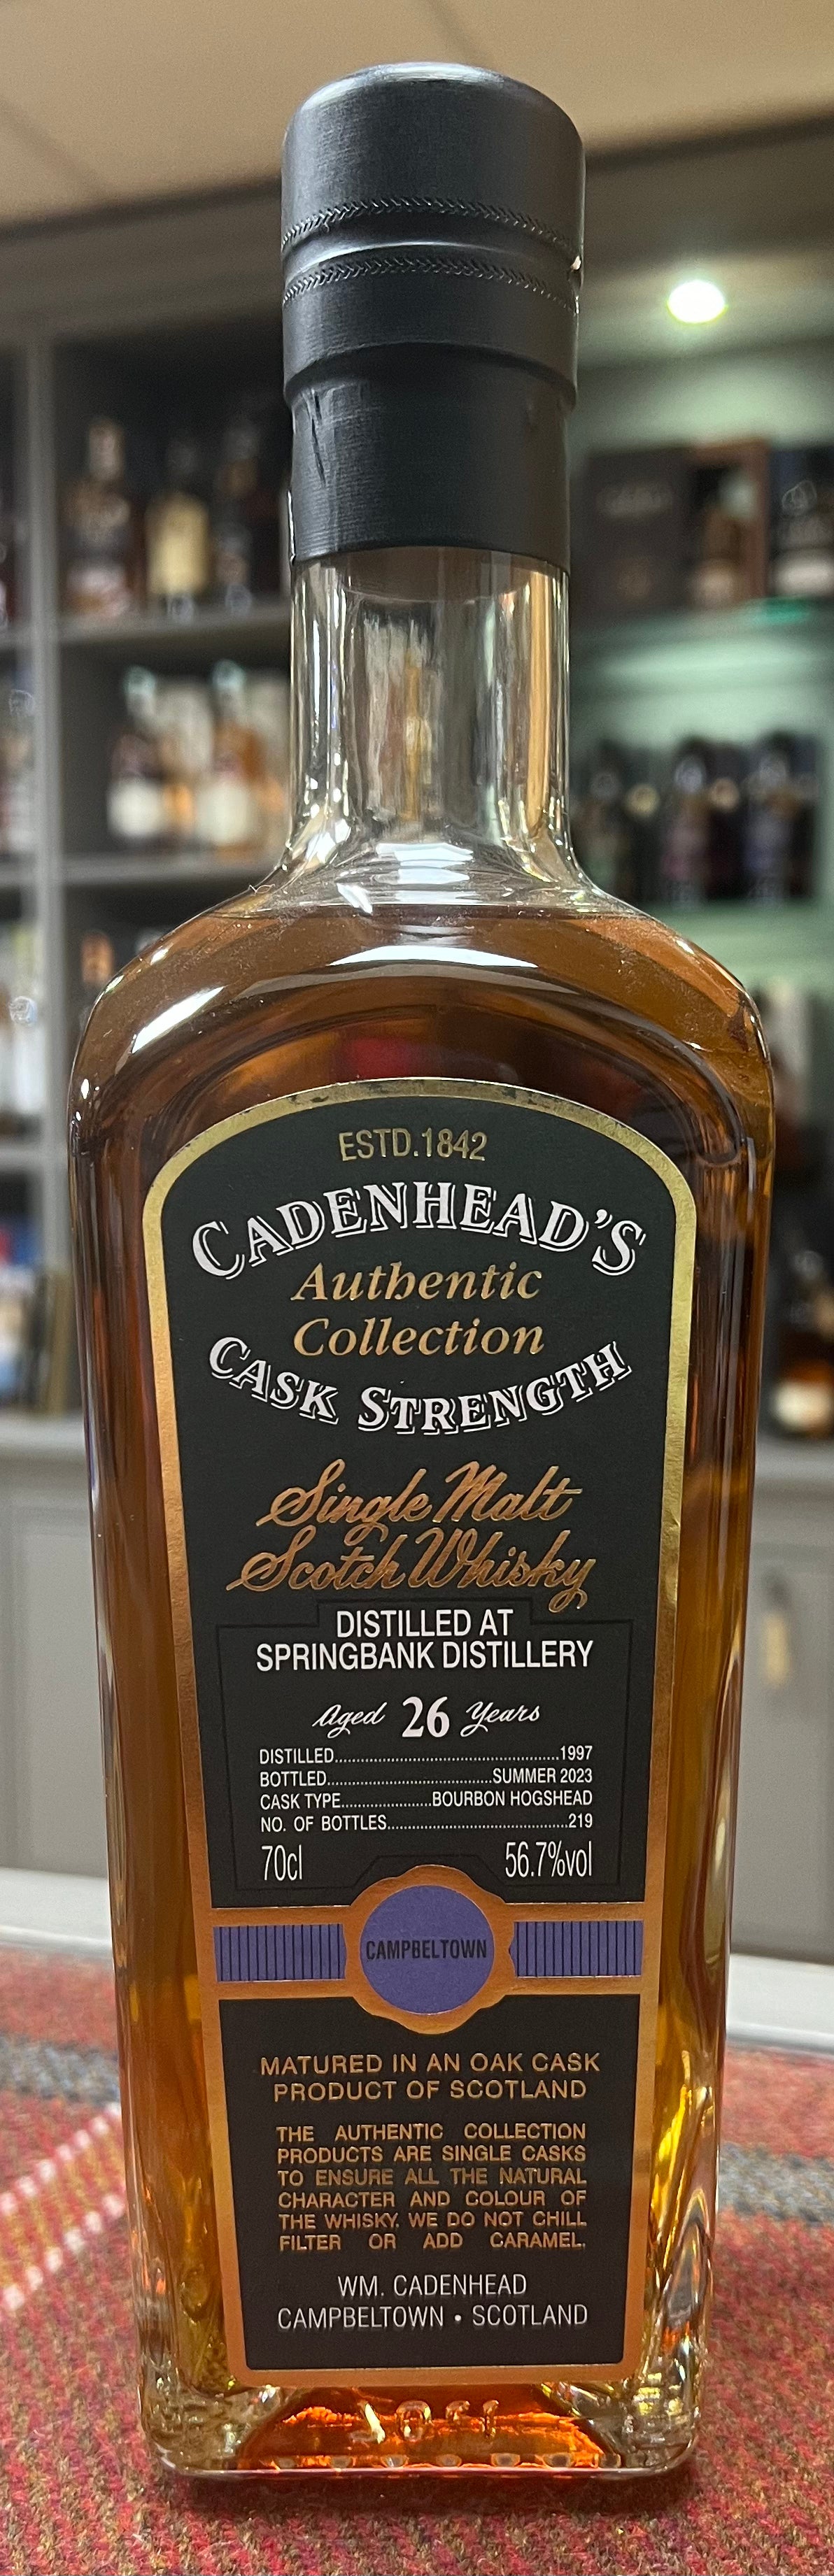 Cadenheads Authentic Collection, 26yo Srpingbank Cask Strength  (70cl, 56.7%)